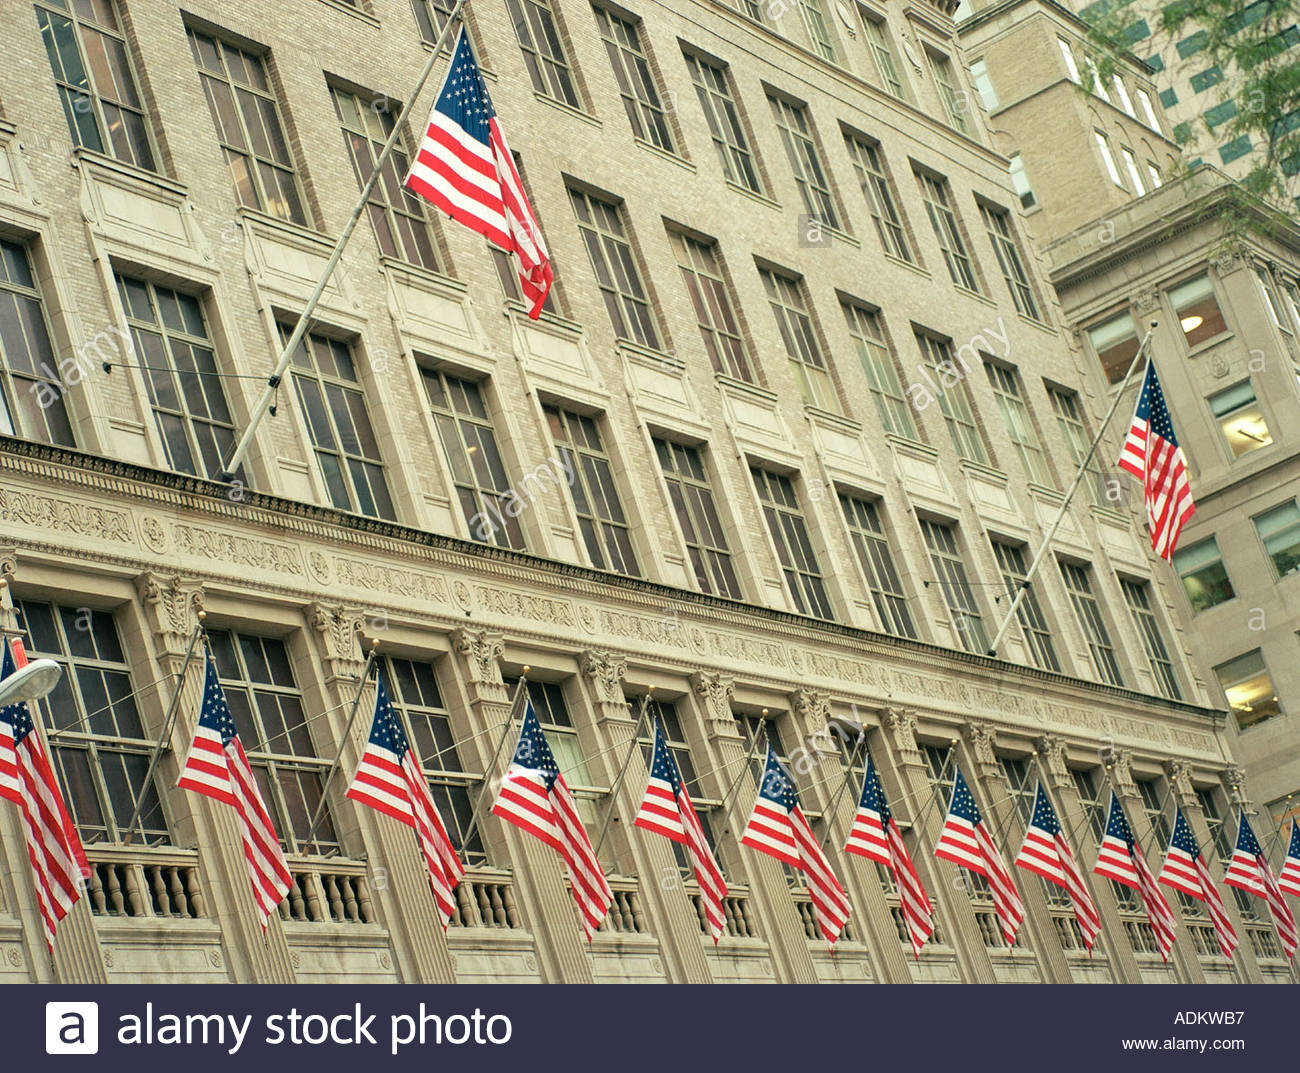 Daily News Building New York High Resolution Stock Photography and ...